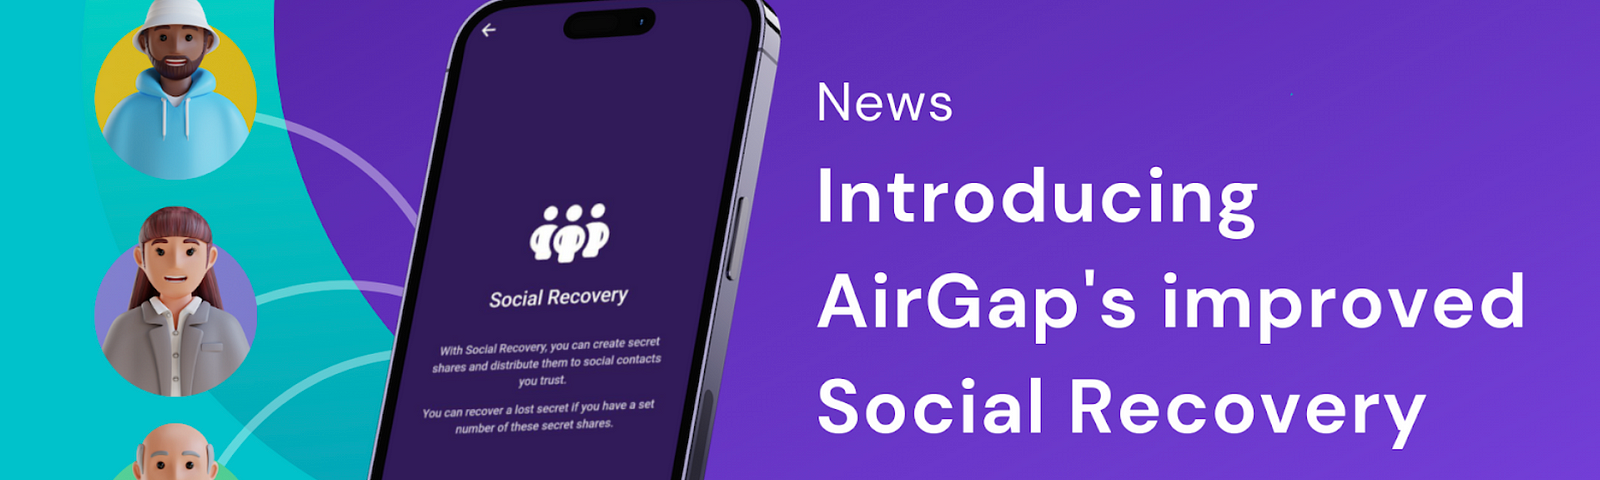 AirGap’s improved Social Recovery